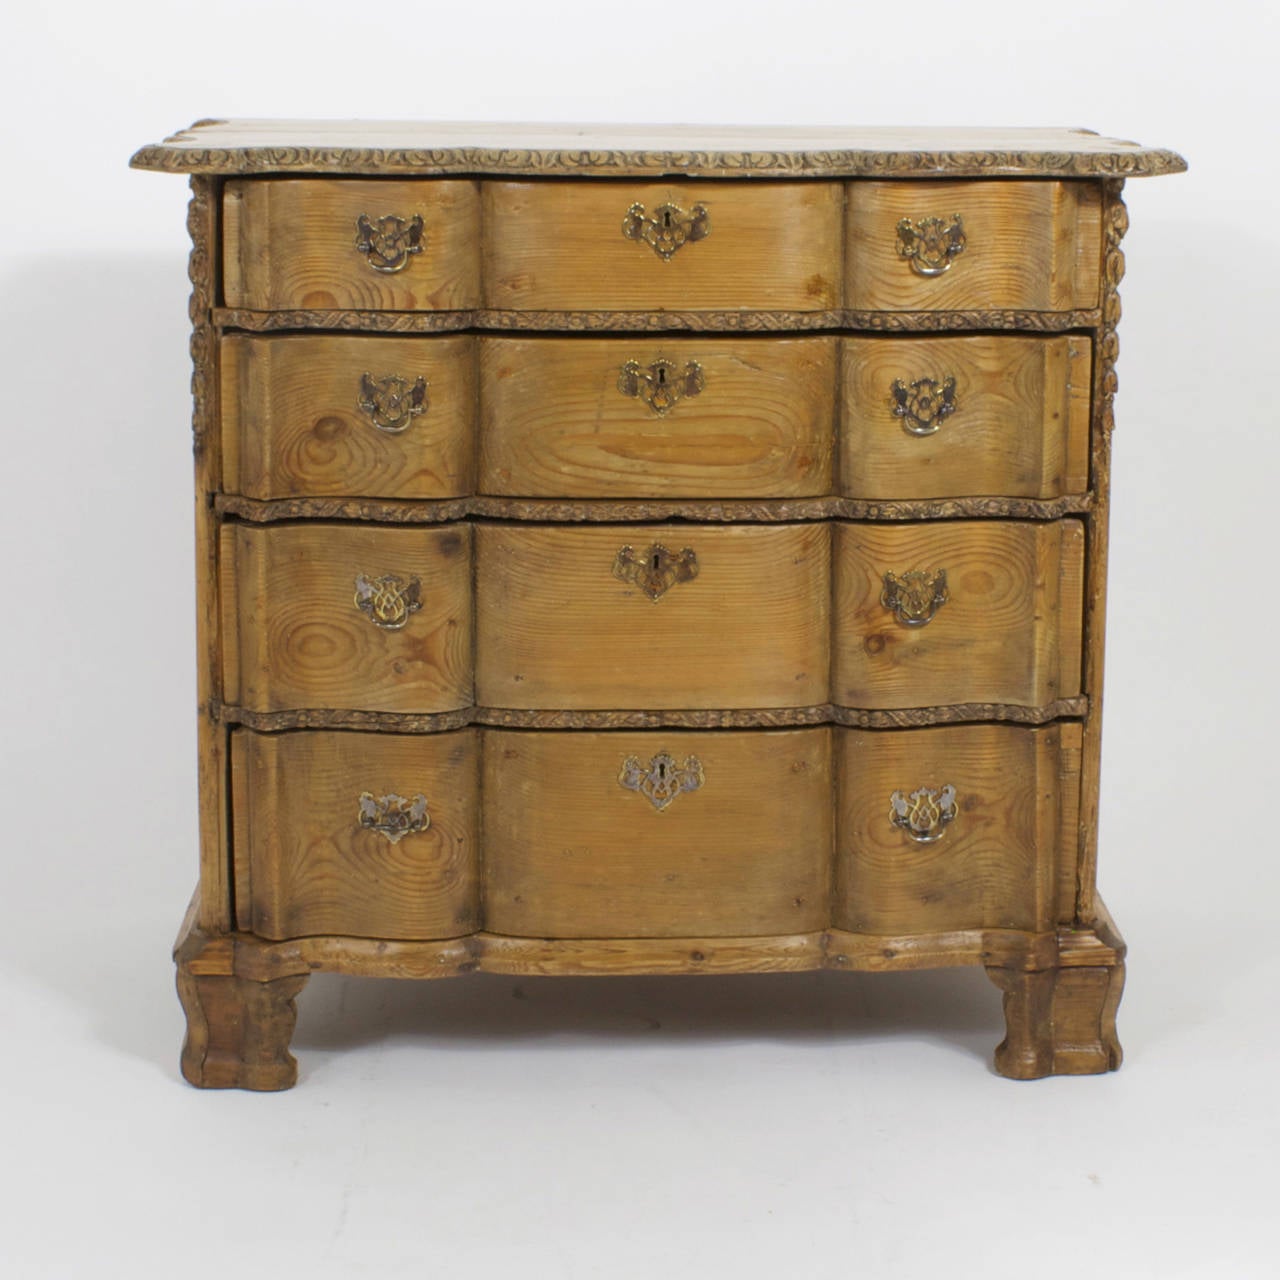 A rare 18th century French commode or dresser having a well-worn top with scalloped and carved edges. The four drawers are shaped to match the scalloped form of the top with floral carved dividers between each drawer. The whole chest is resting on